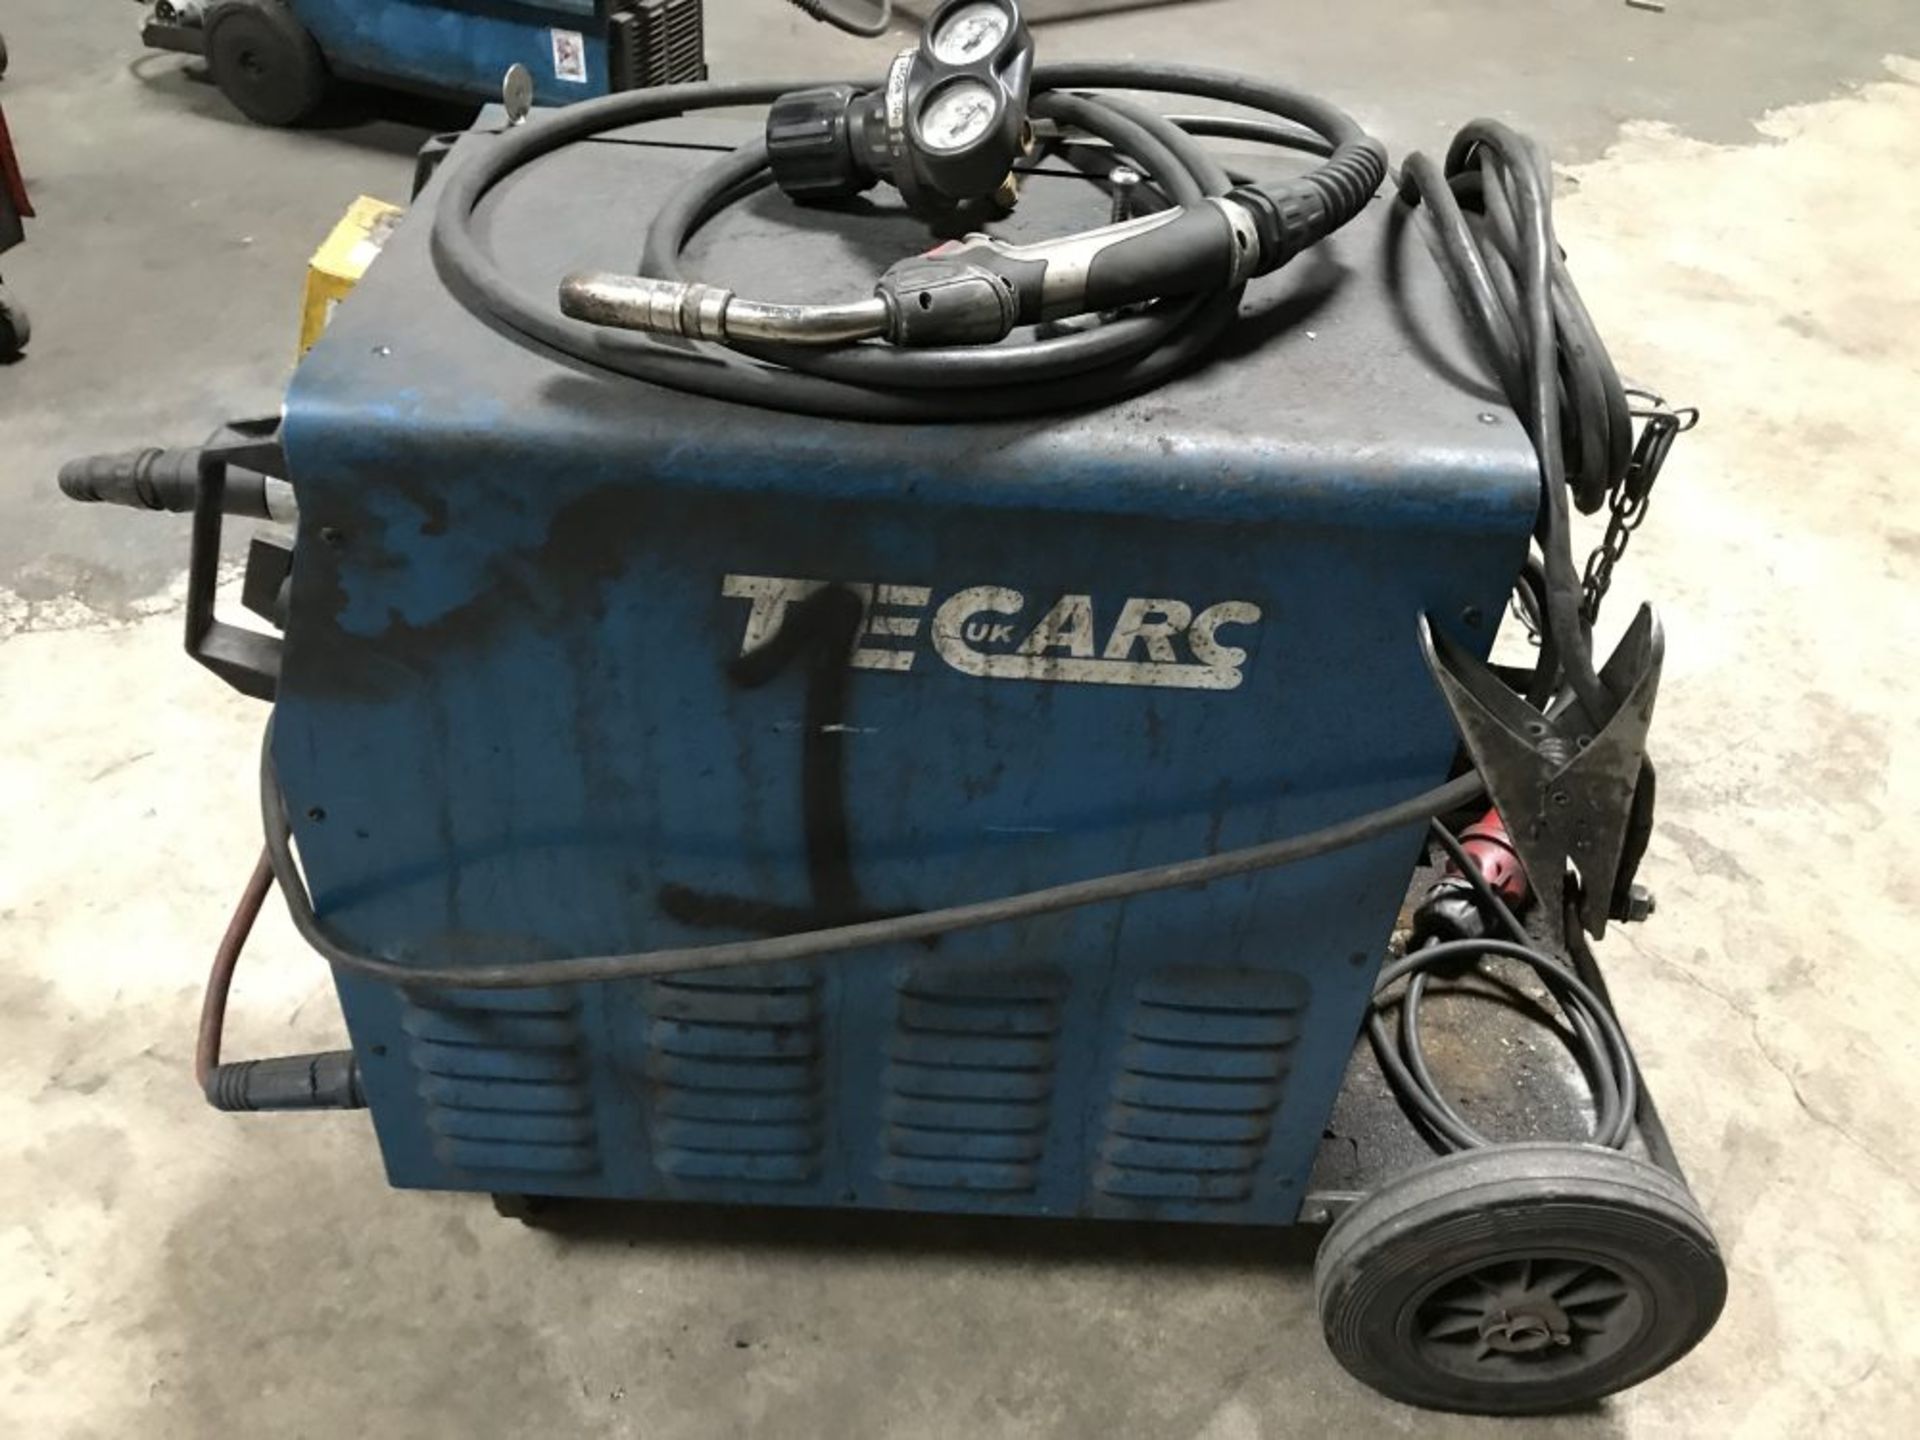 TecArc welding set with regulator, torch, hose and trolley - Image 3 of 6